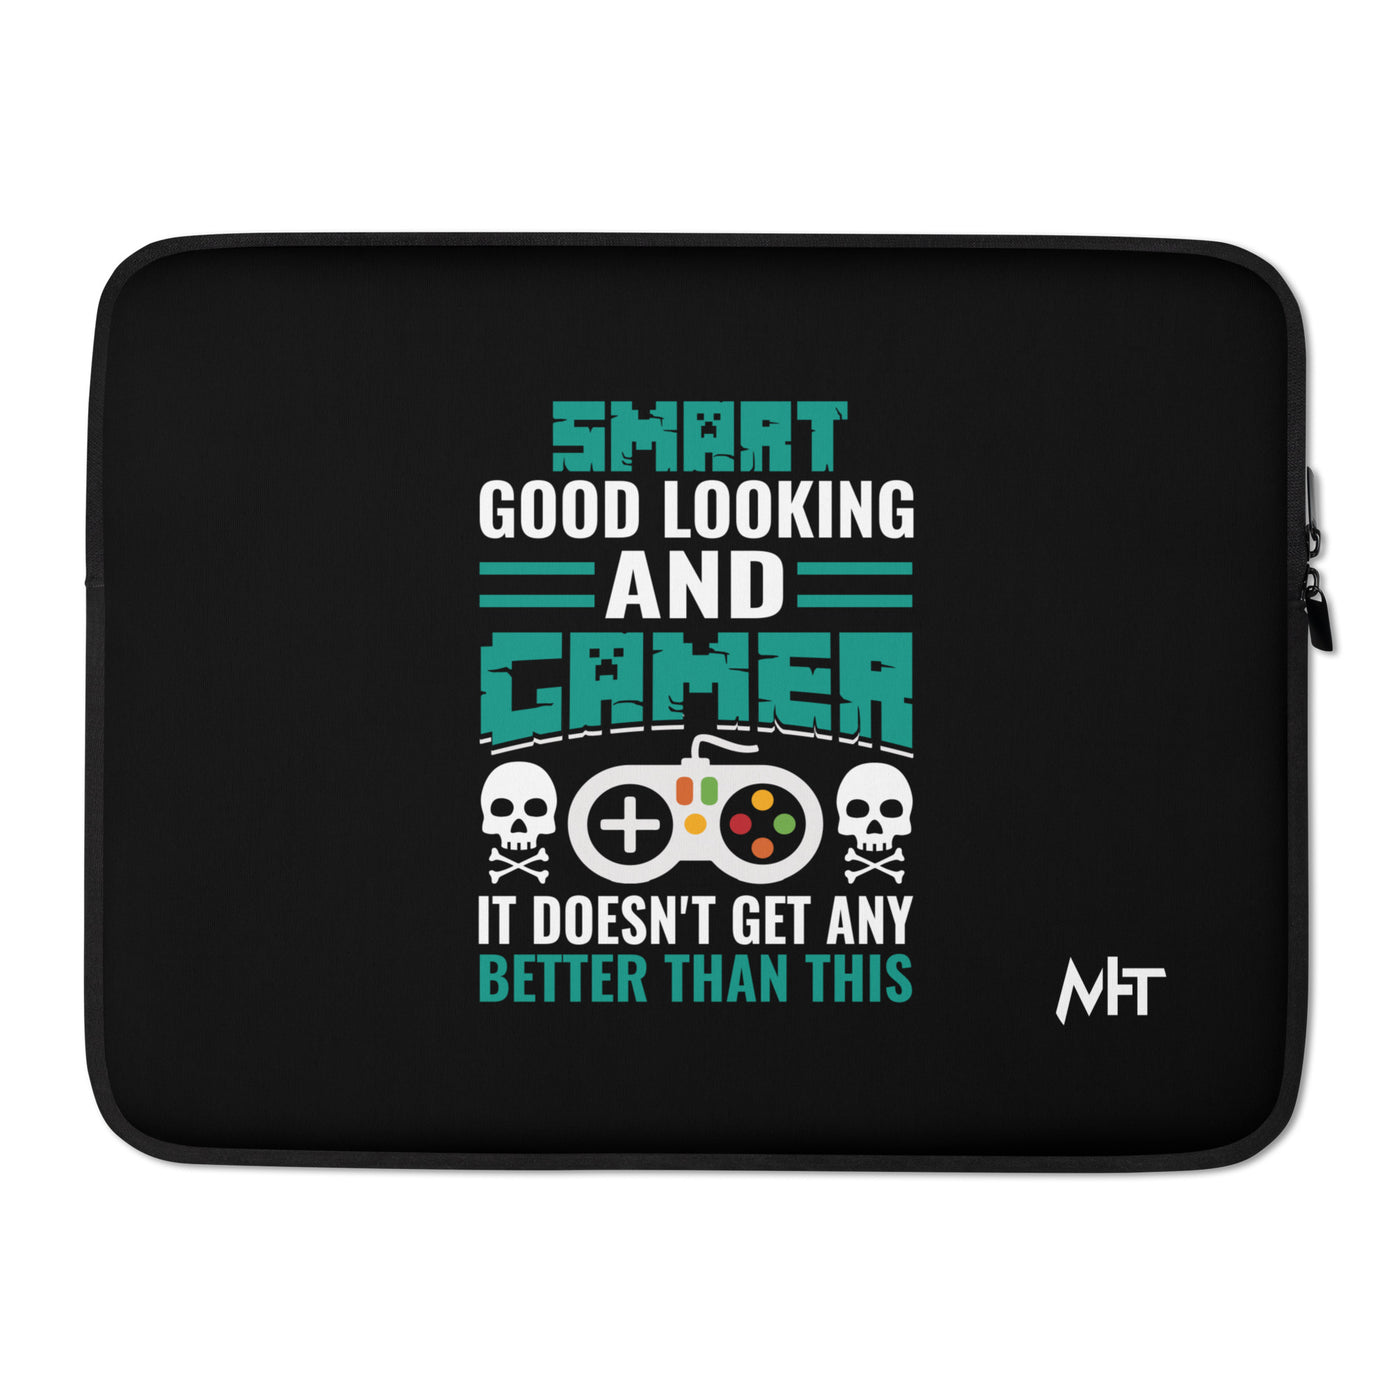 Smart Good Looking and Gamer; It Doesn't Get Any Better than this - Laptop Sleeve